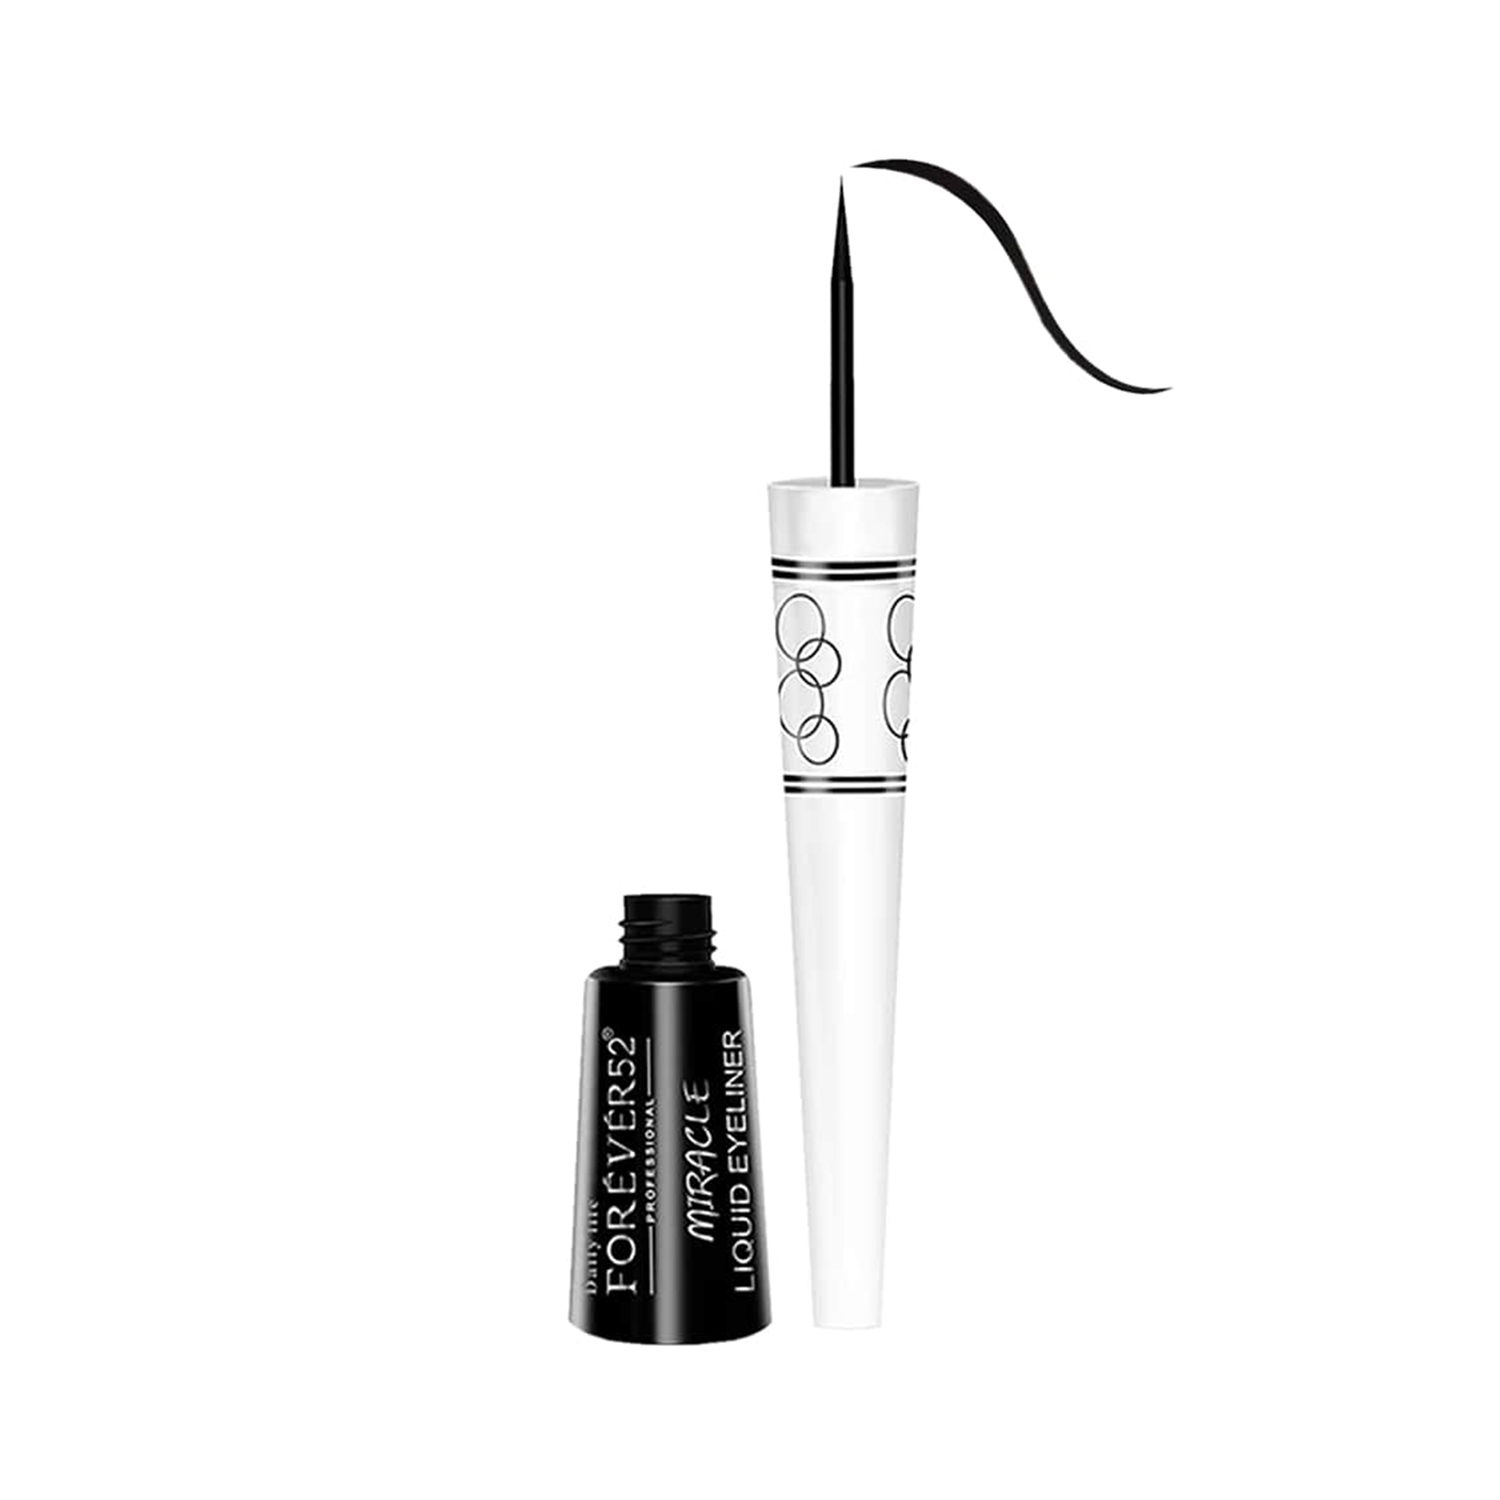 Daily Life Forever52 | Daily Life Forever52 Miracle Liquid Eyeliner ARG001 - Bold Black (3ml)